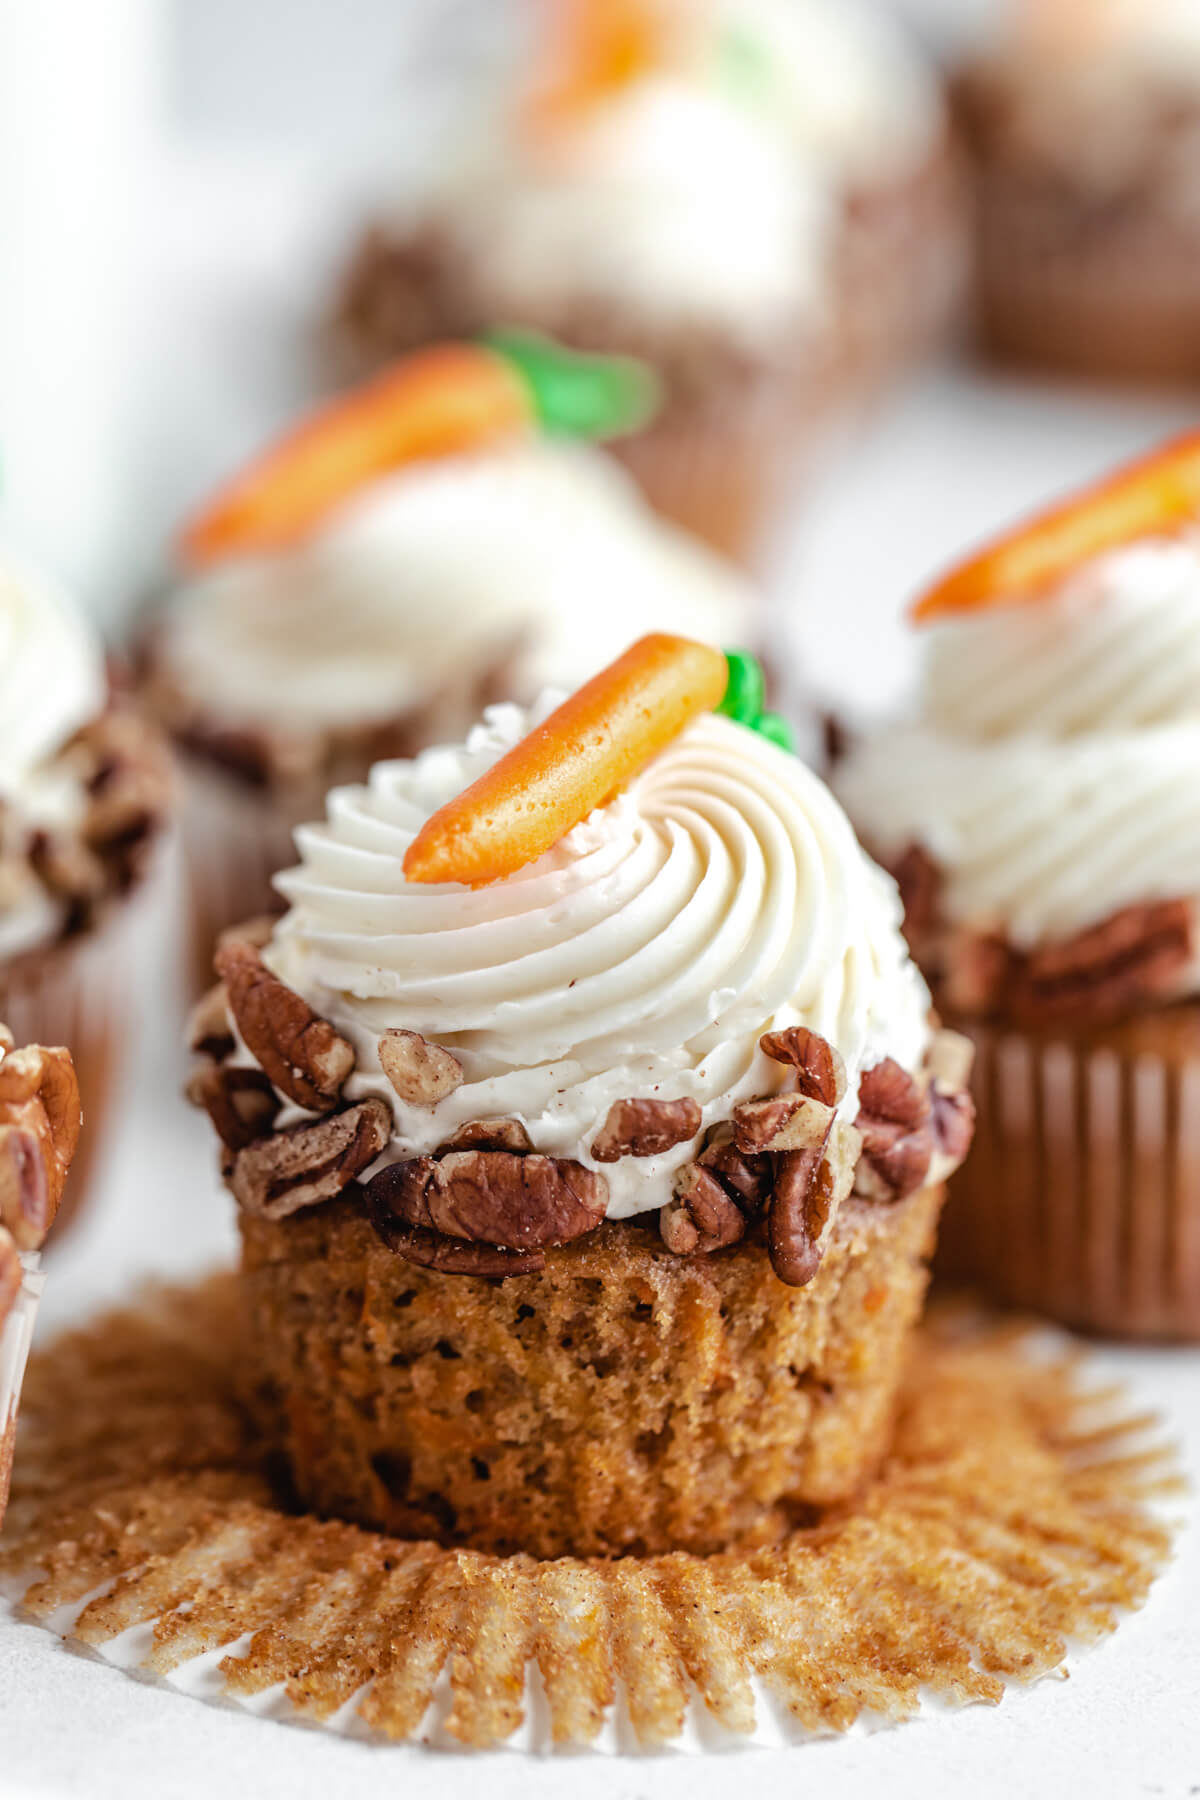 Carrot Cake Cupcakes with Cream Cheese Frosting | Queenslee Appétit